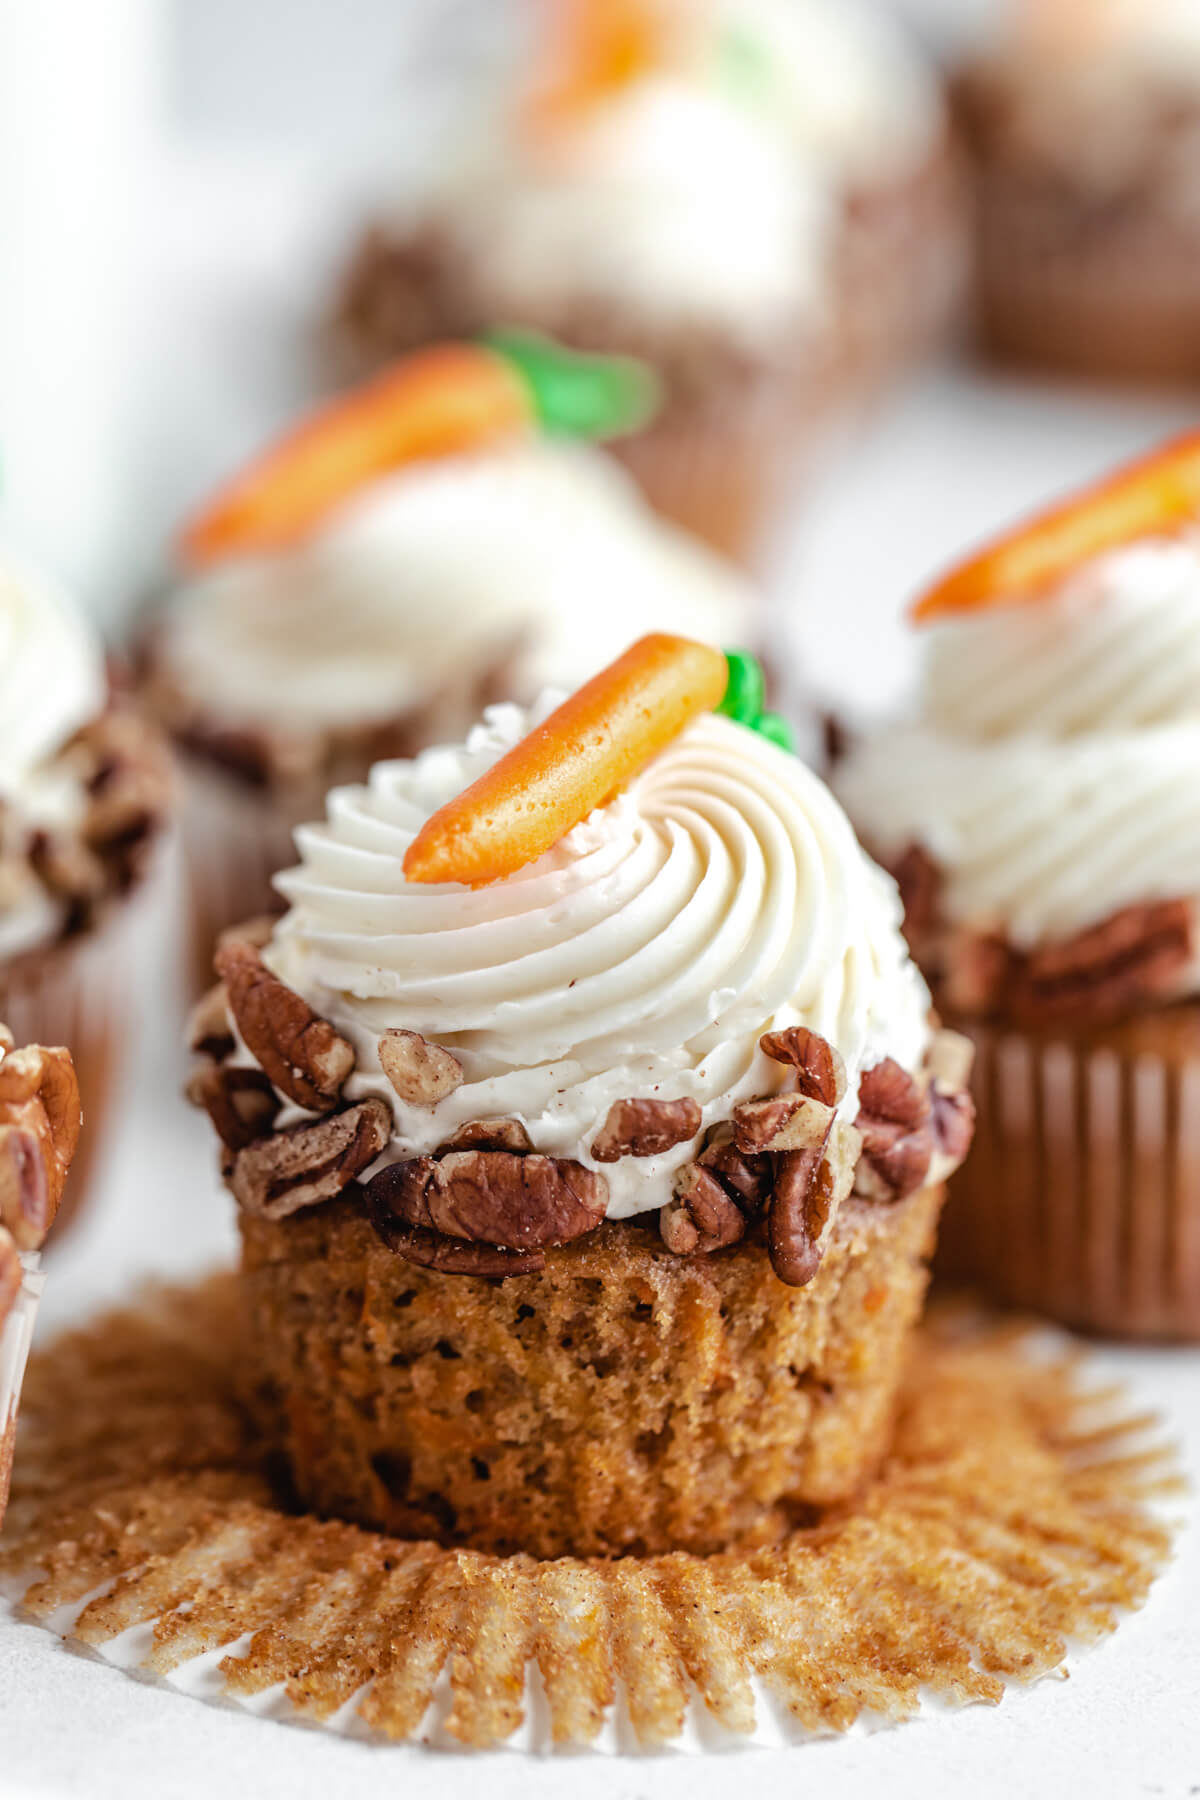 Carrot Cake Cupcakes with Cream Cheese Frosting | Queenslee Appétit